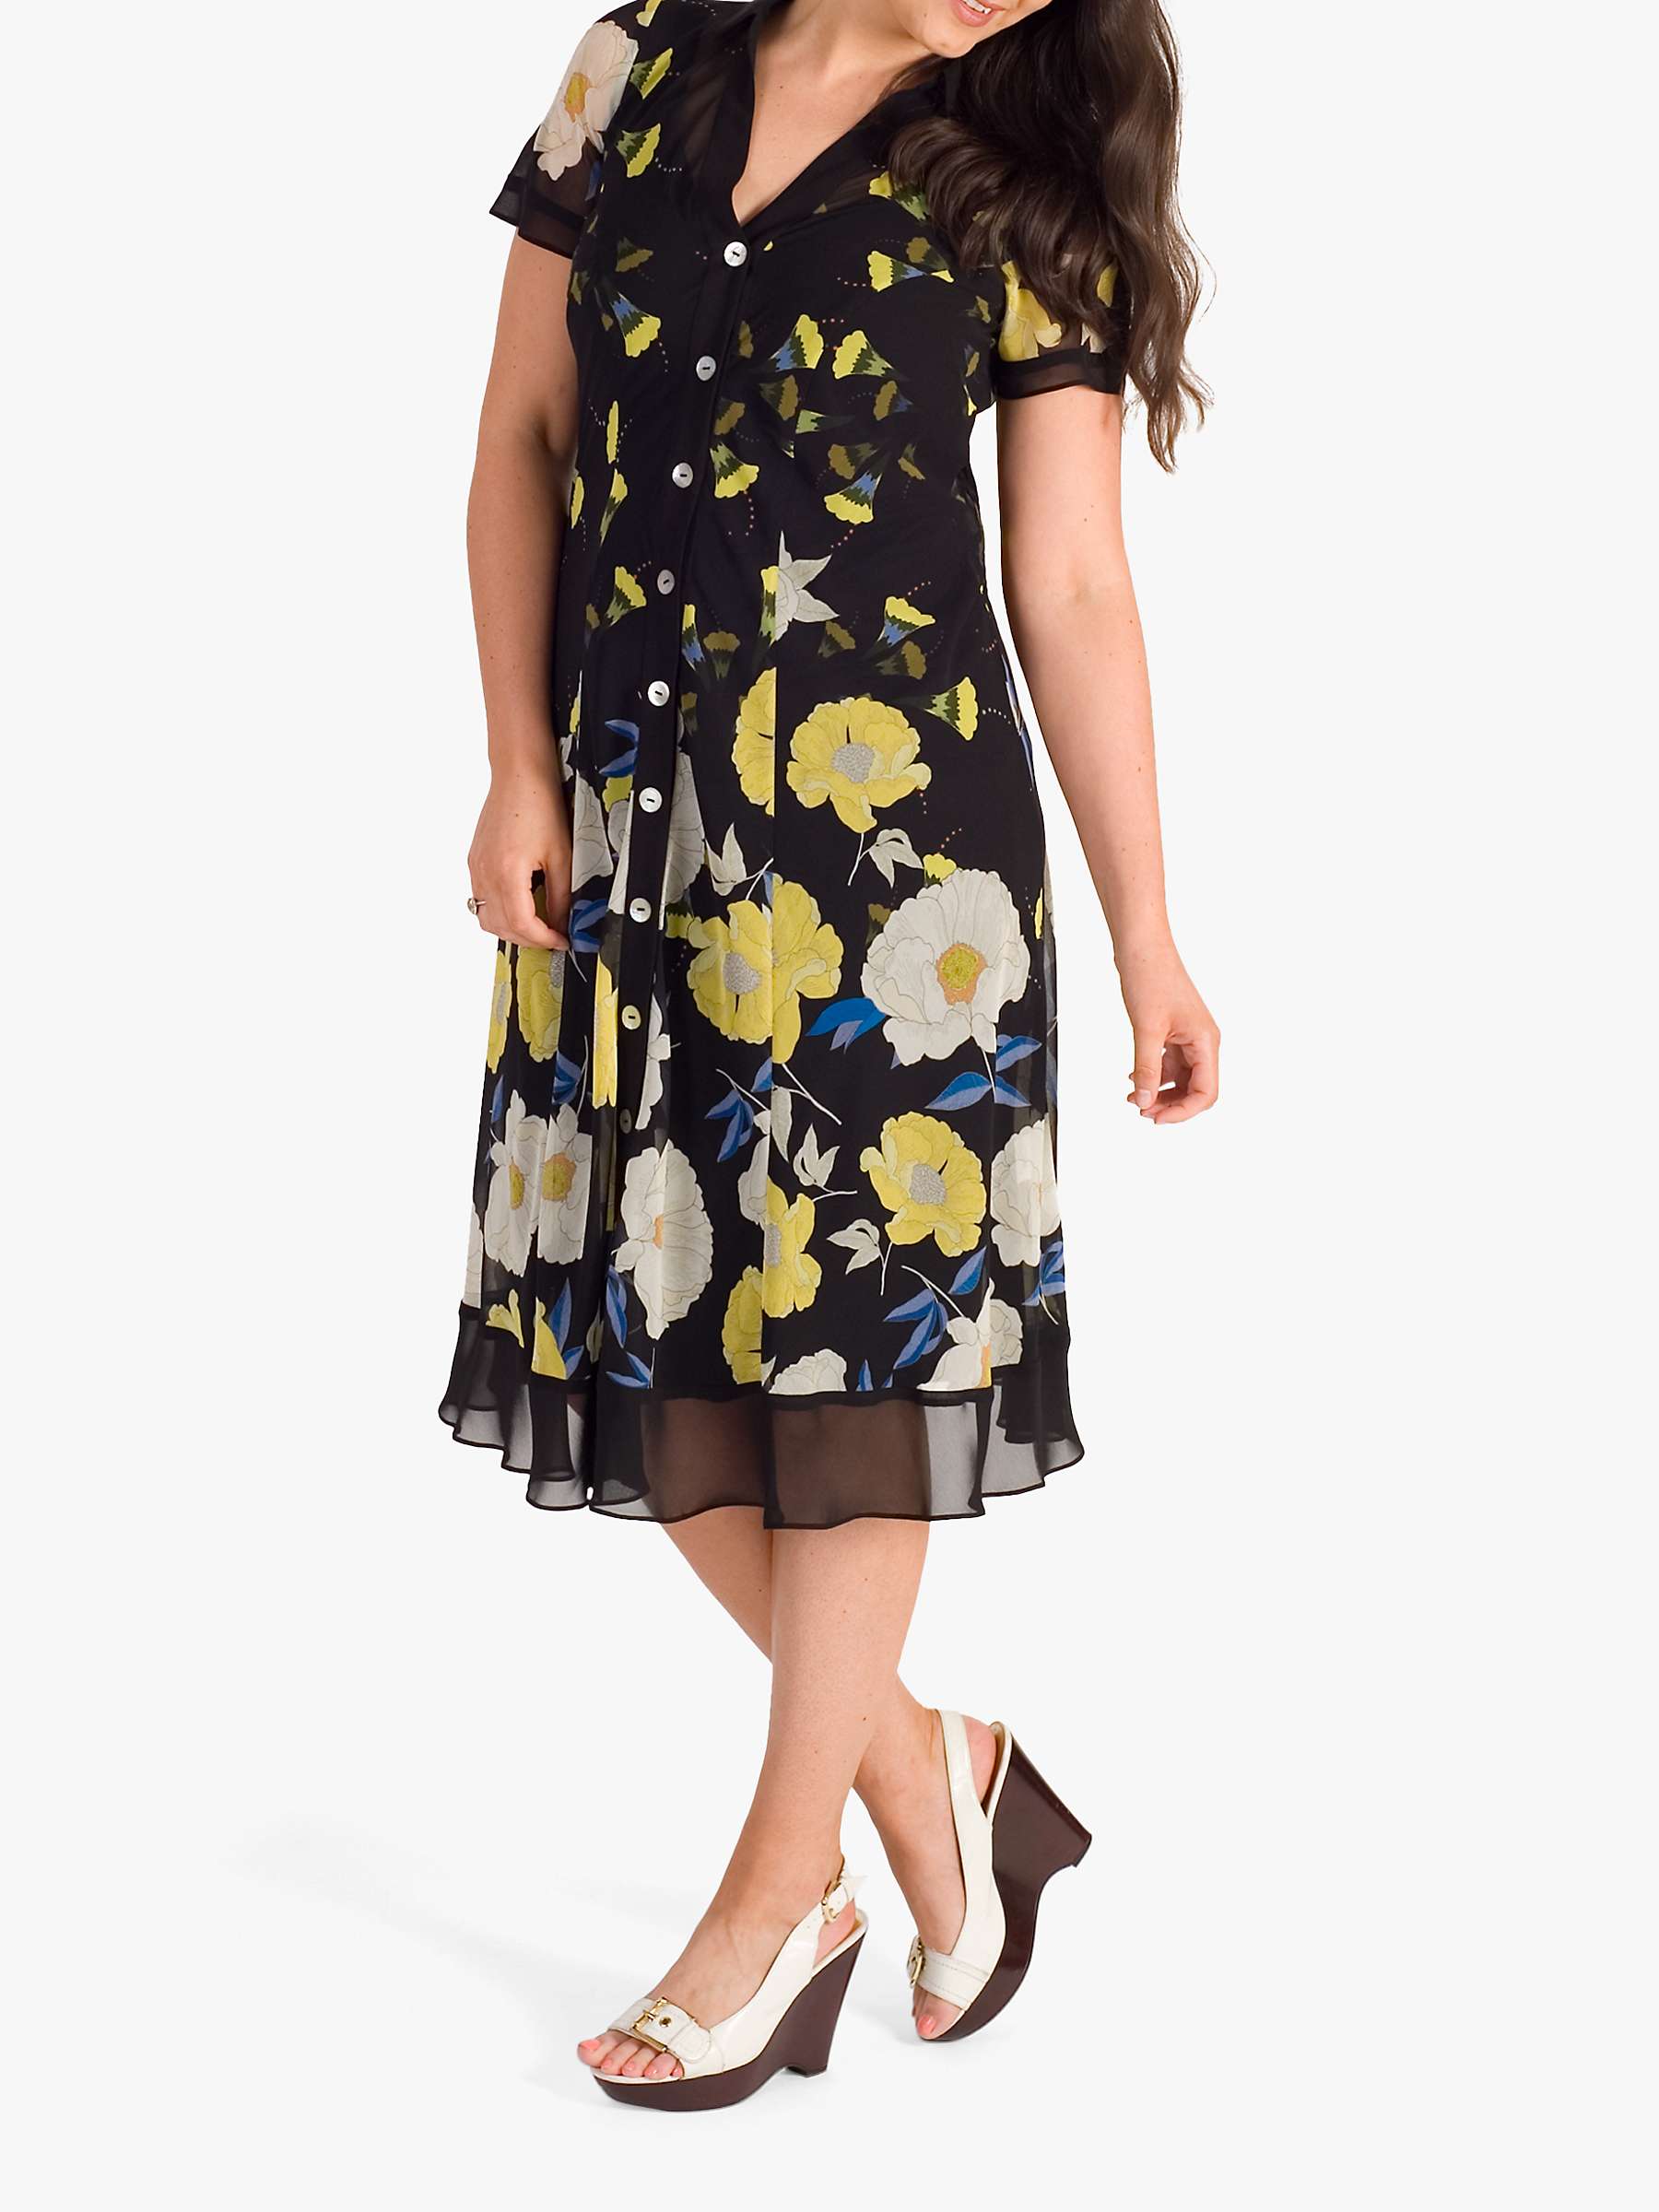 Buy chesca Floral Poppy Border Shirt Dress, Black/Yellow Online at johnlewis.com